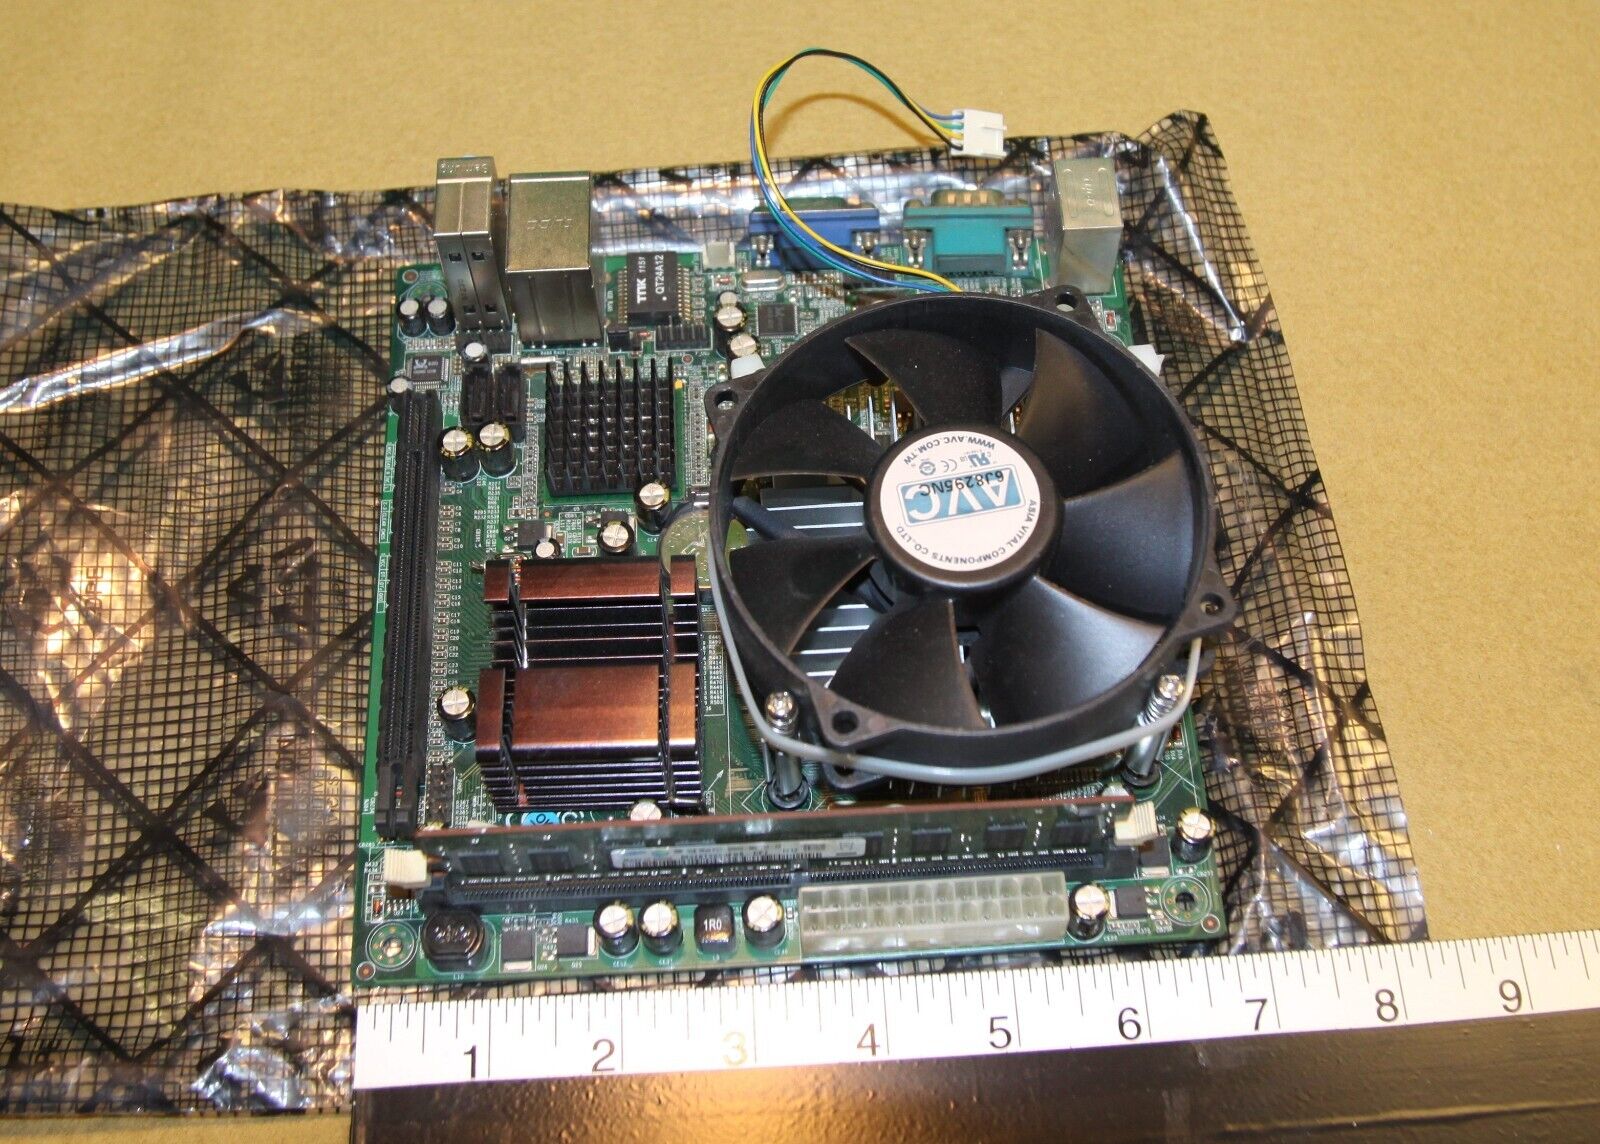 ITX-945G-G motherboard - Tested good